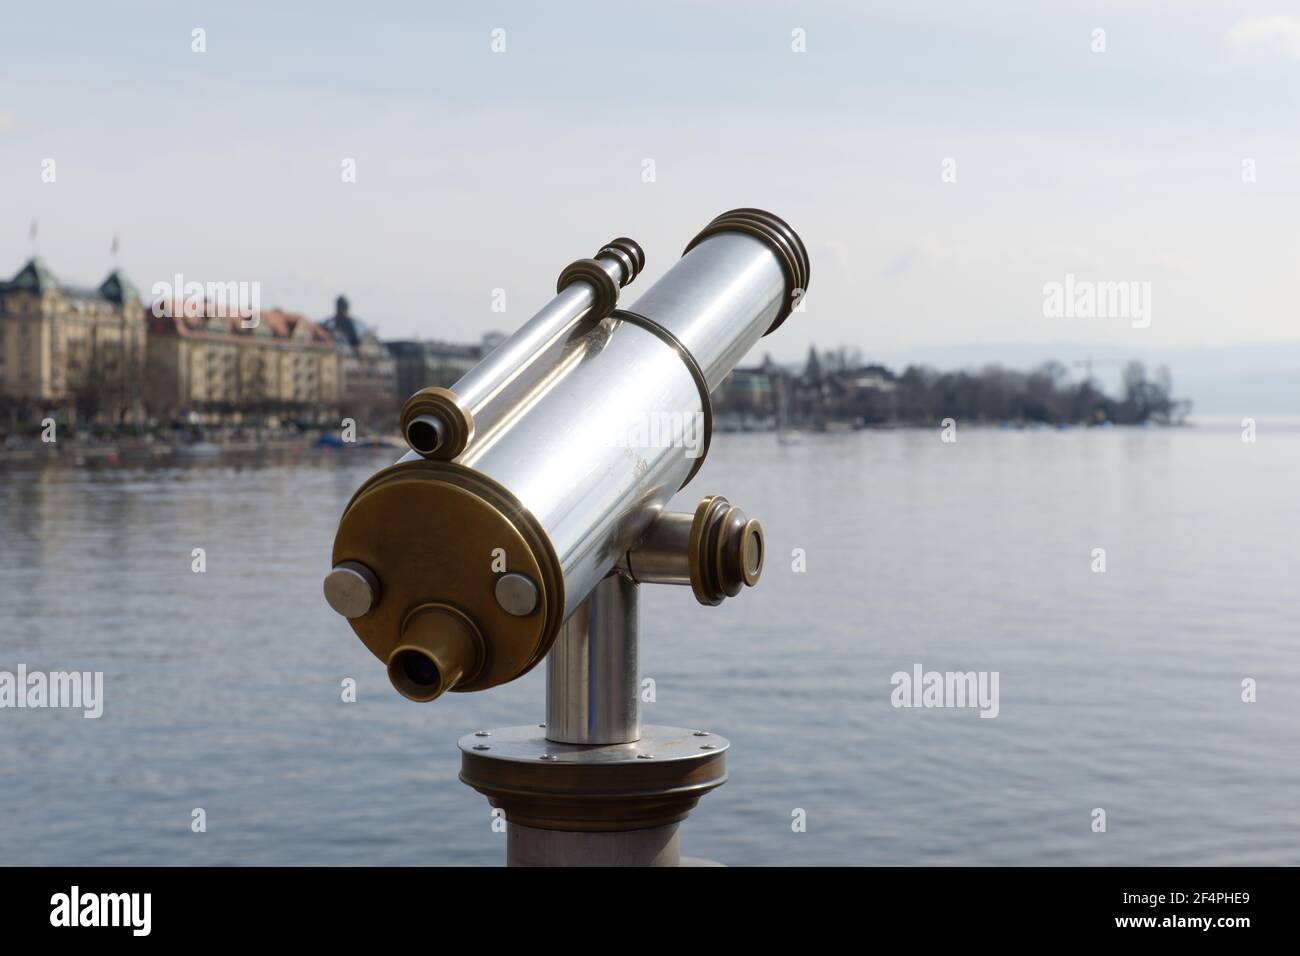 antiques old interesting observation platform binoculars for city and landscape sightseeing made of metal and golden copper, by day, without perons Stock Photo